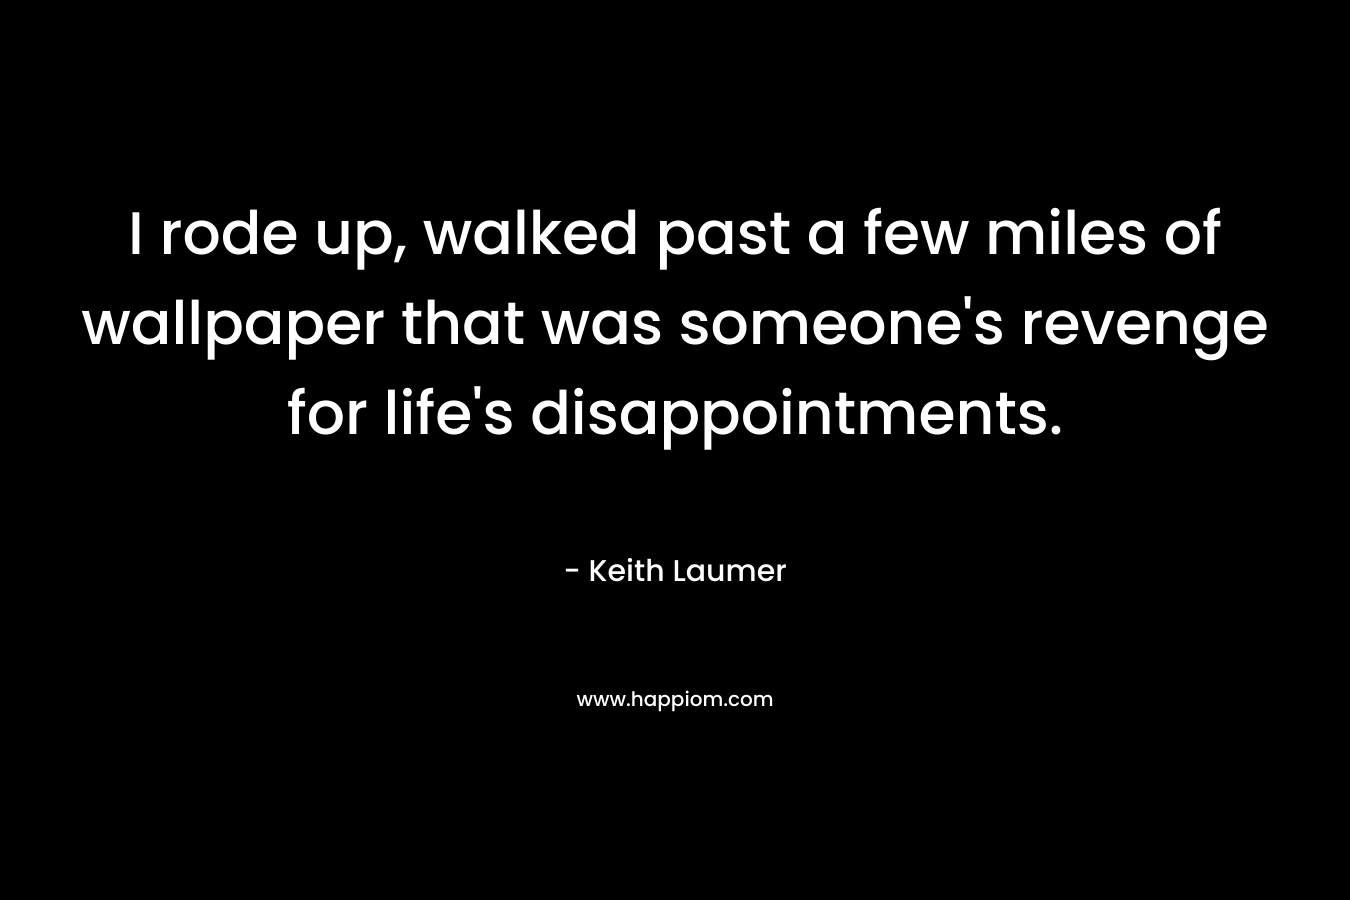 I rode up, walked past a few miles of wallpaper that was someone’s revenge for life’s disappointments. – Keith Laumer